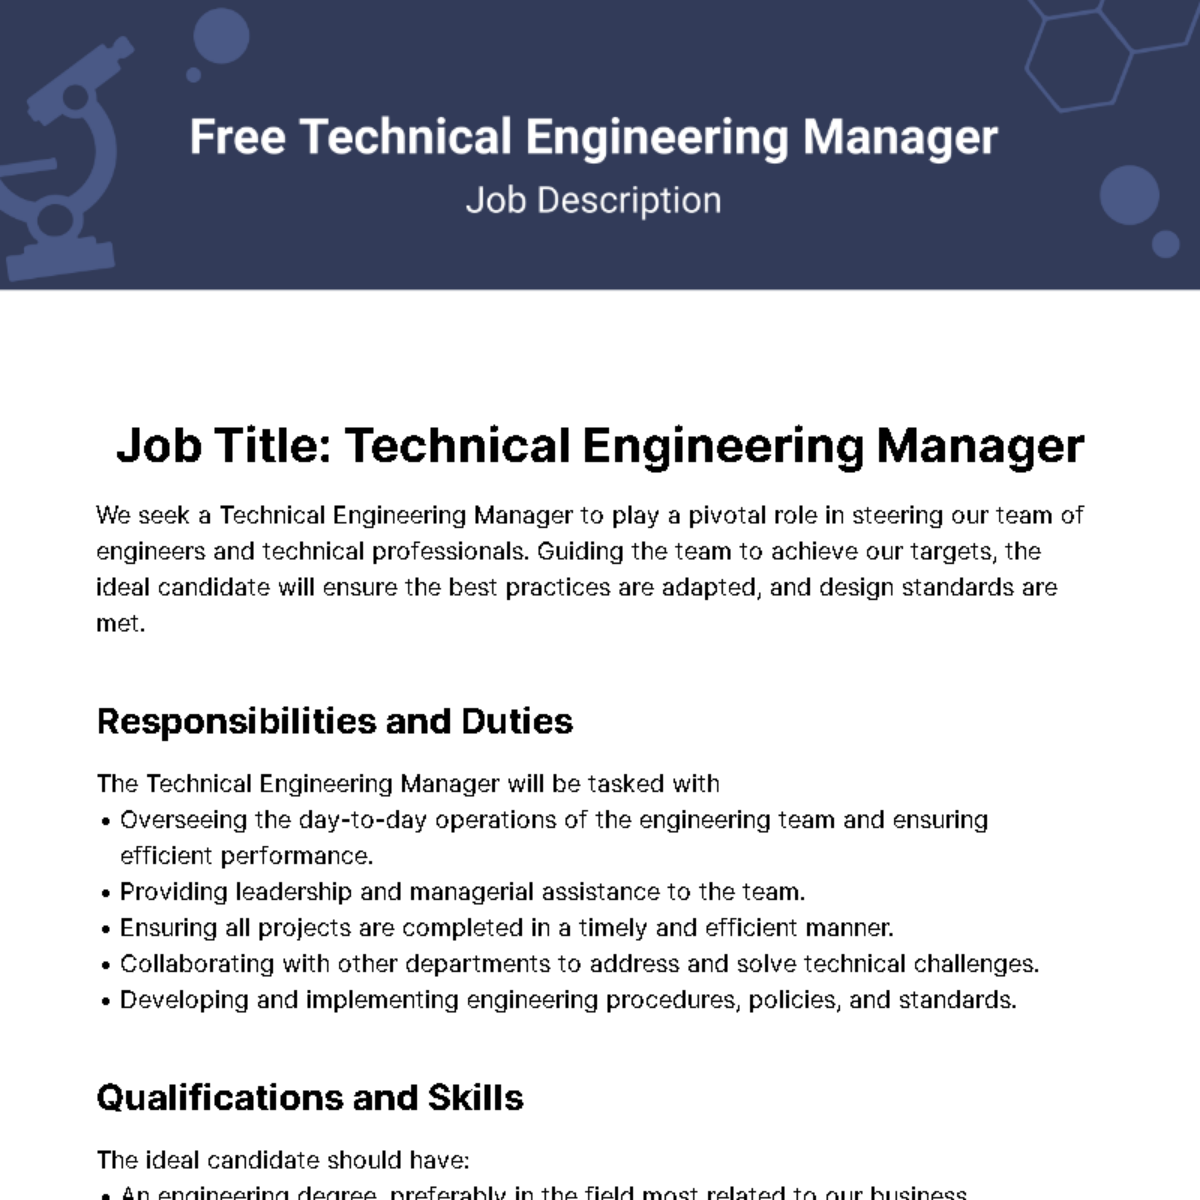 Technical Engineering Manager Job Description Template